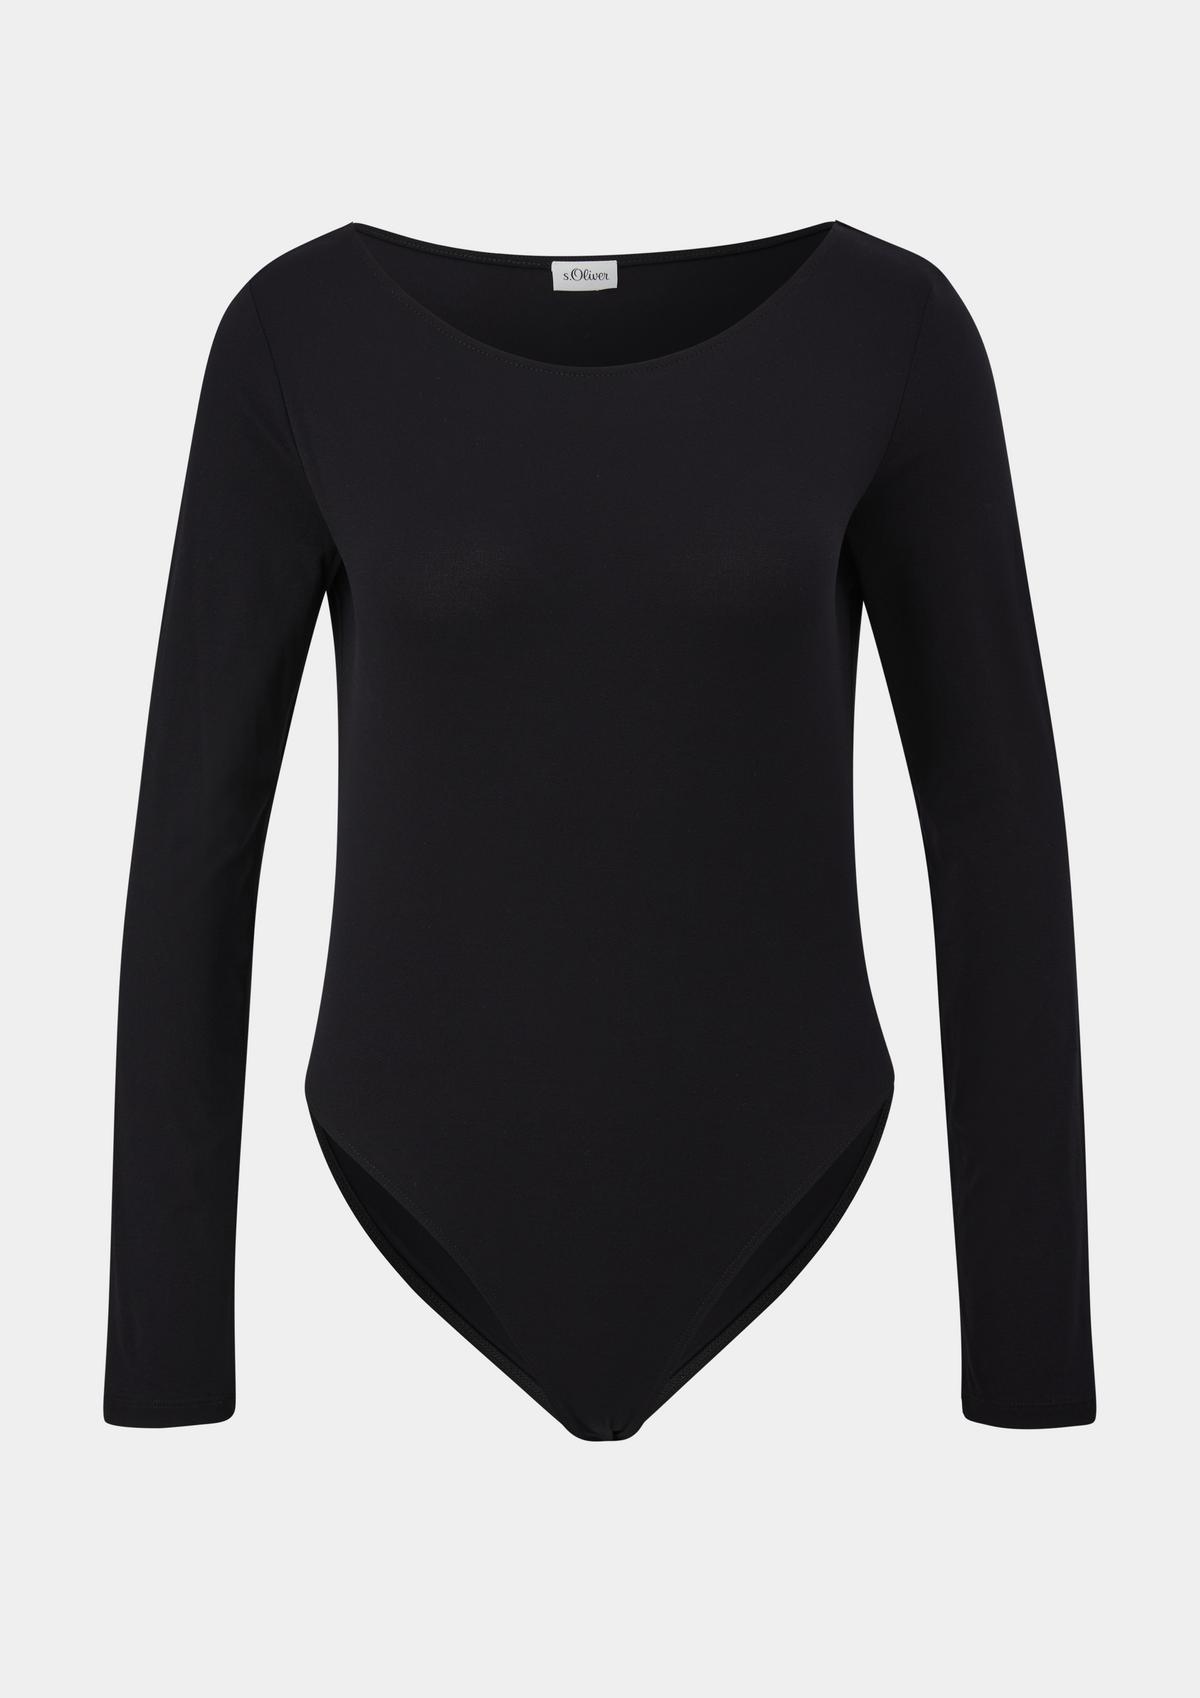 s.Oliver Long sleeve body made of jersey